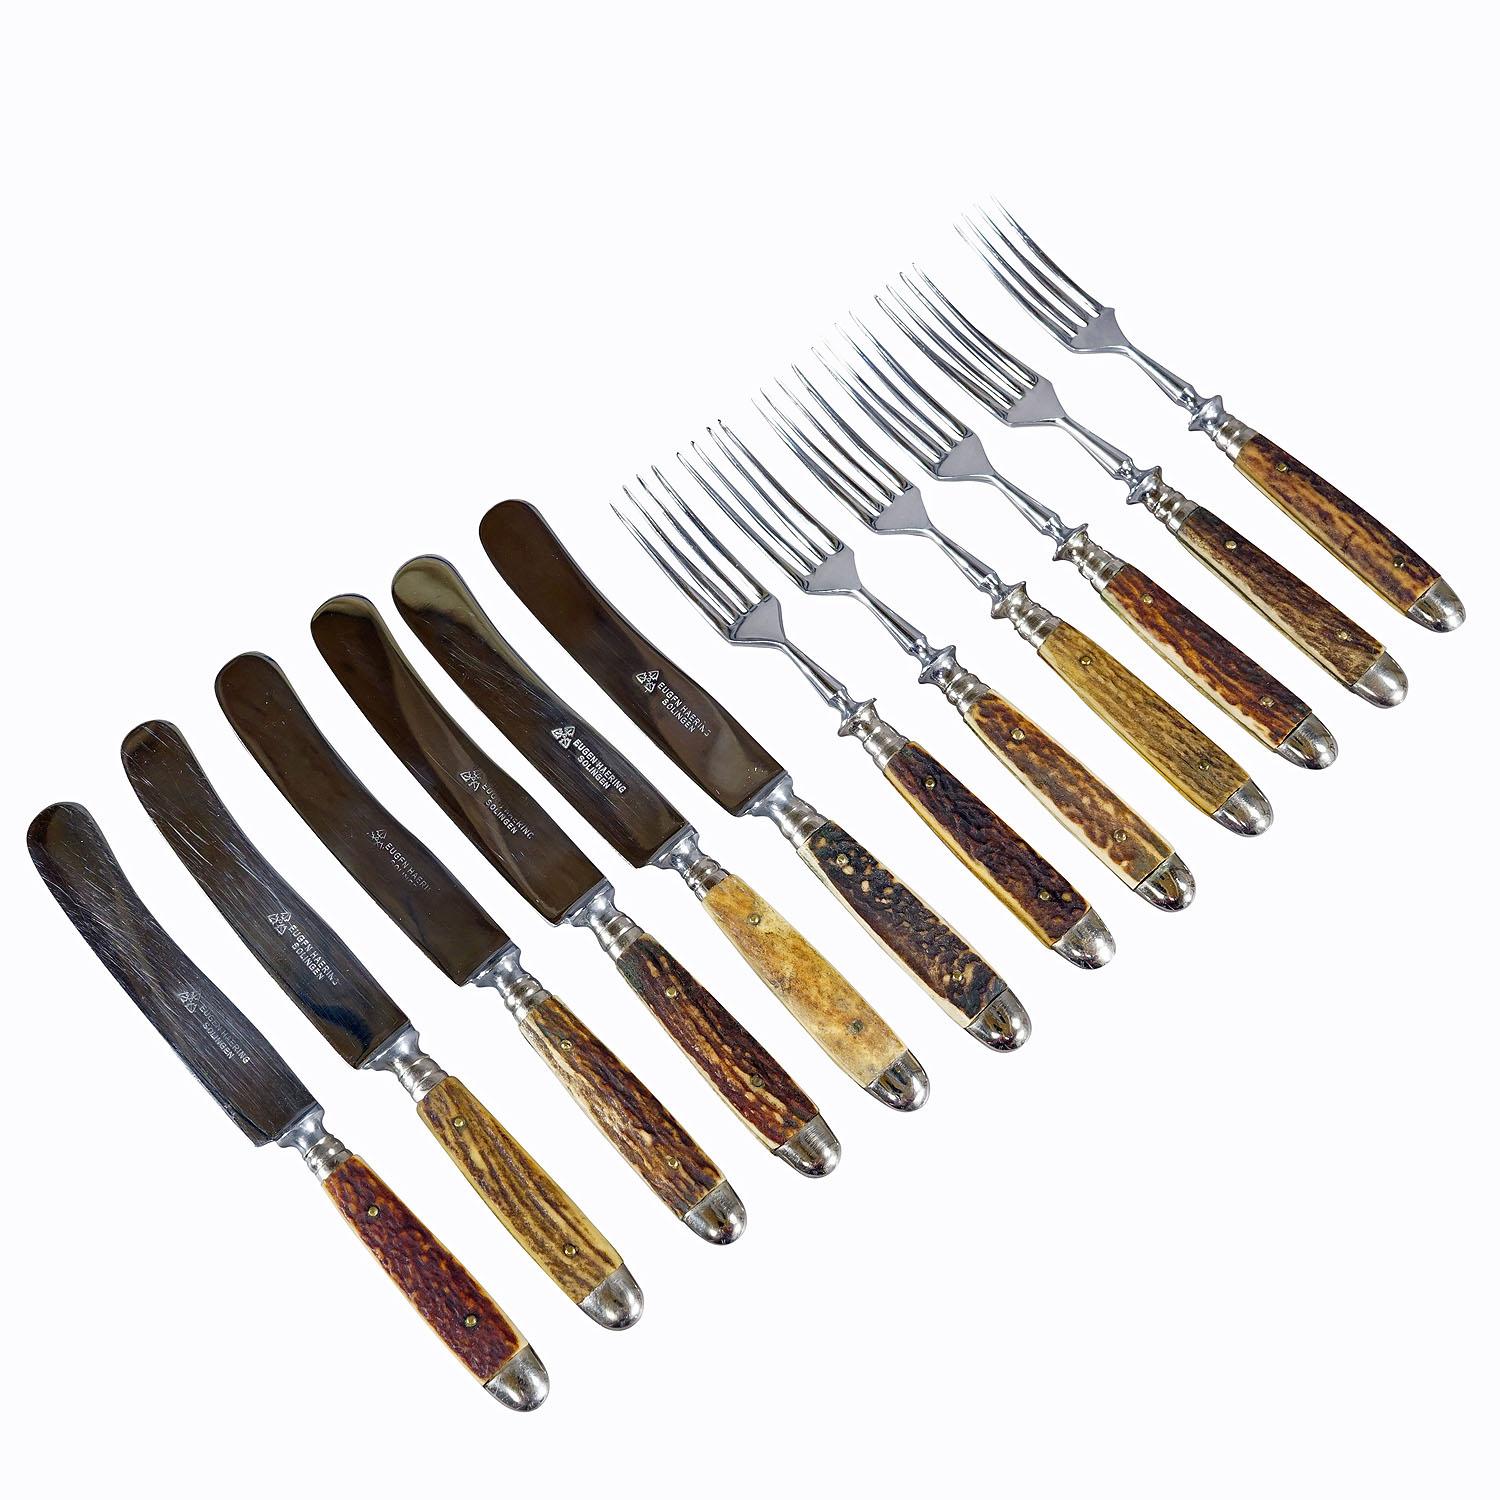 Antique Stainless Steel and Horn 12 Pieces Tableware Set, Germany 1930s

A rustic tabelware set consisting of six knives and six forks. The handles are made of genuine deer horn. The blades are made of stainles steel. The set was sold in a cutlers